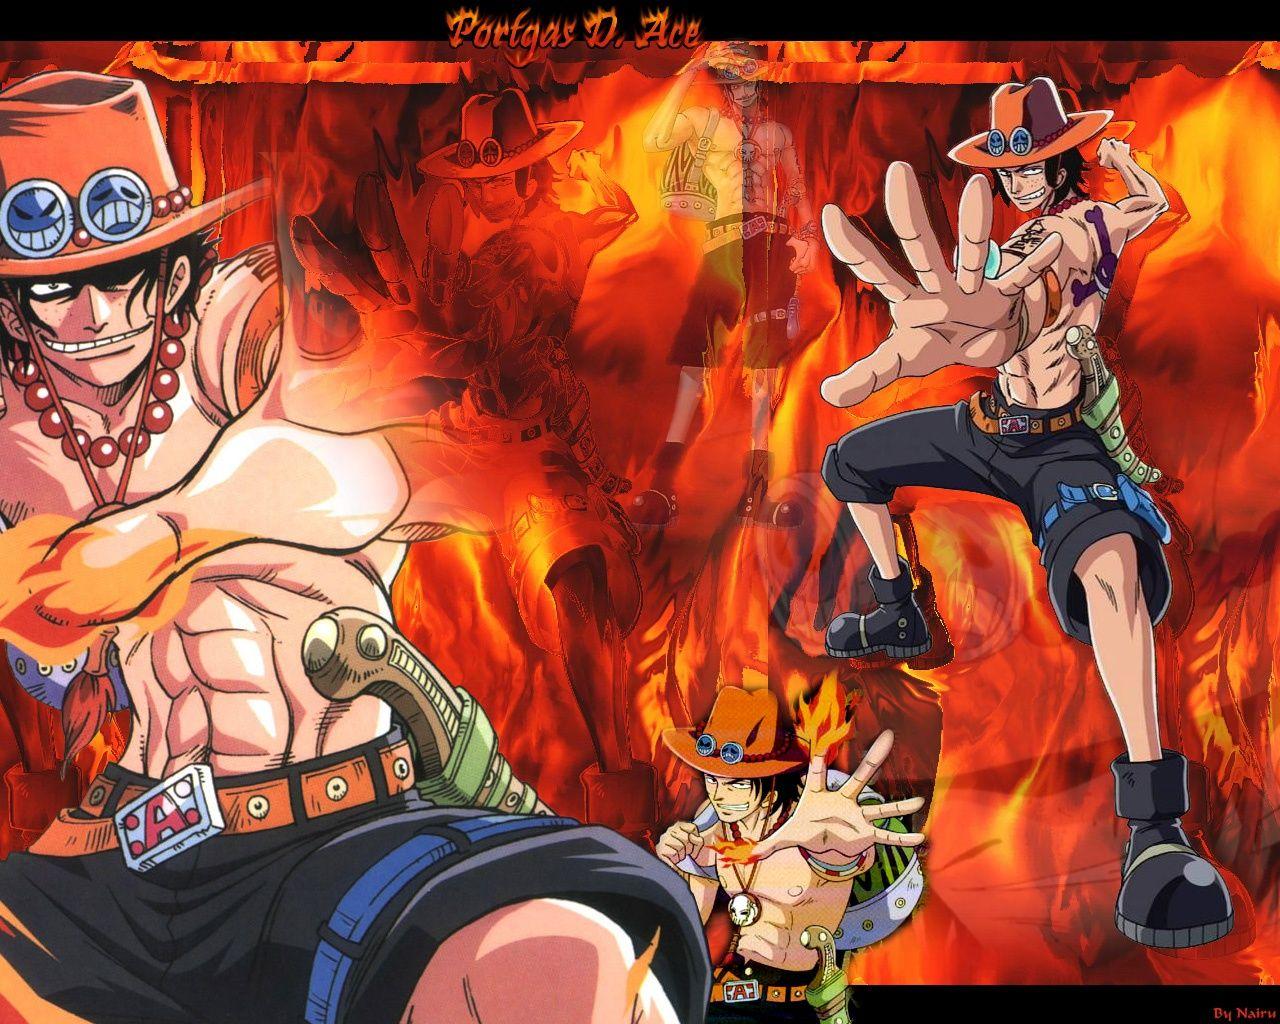 Wallpaper: Japanese Anime Series One Piece (Ace)